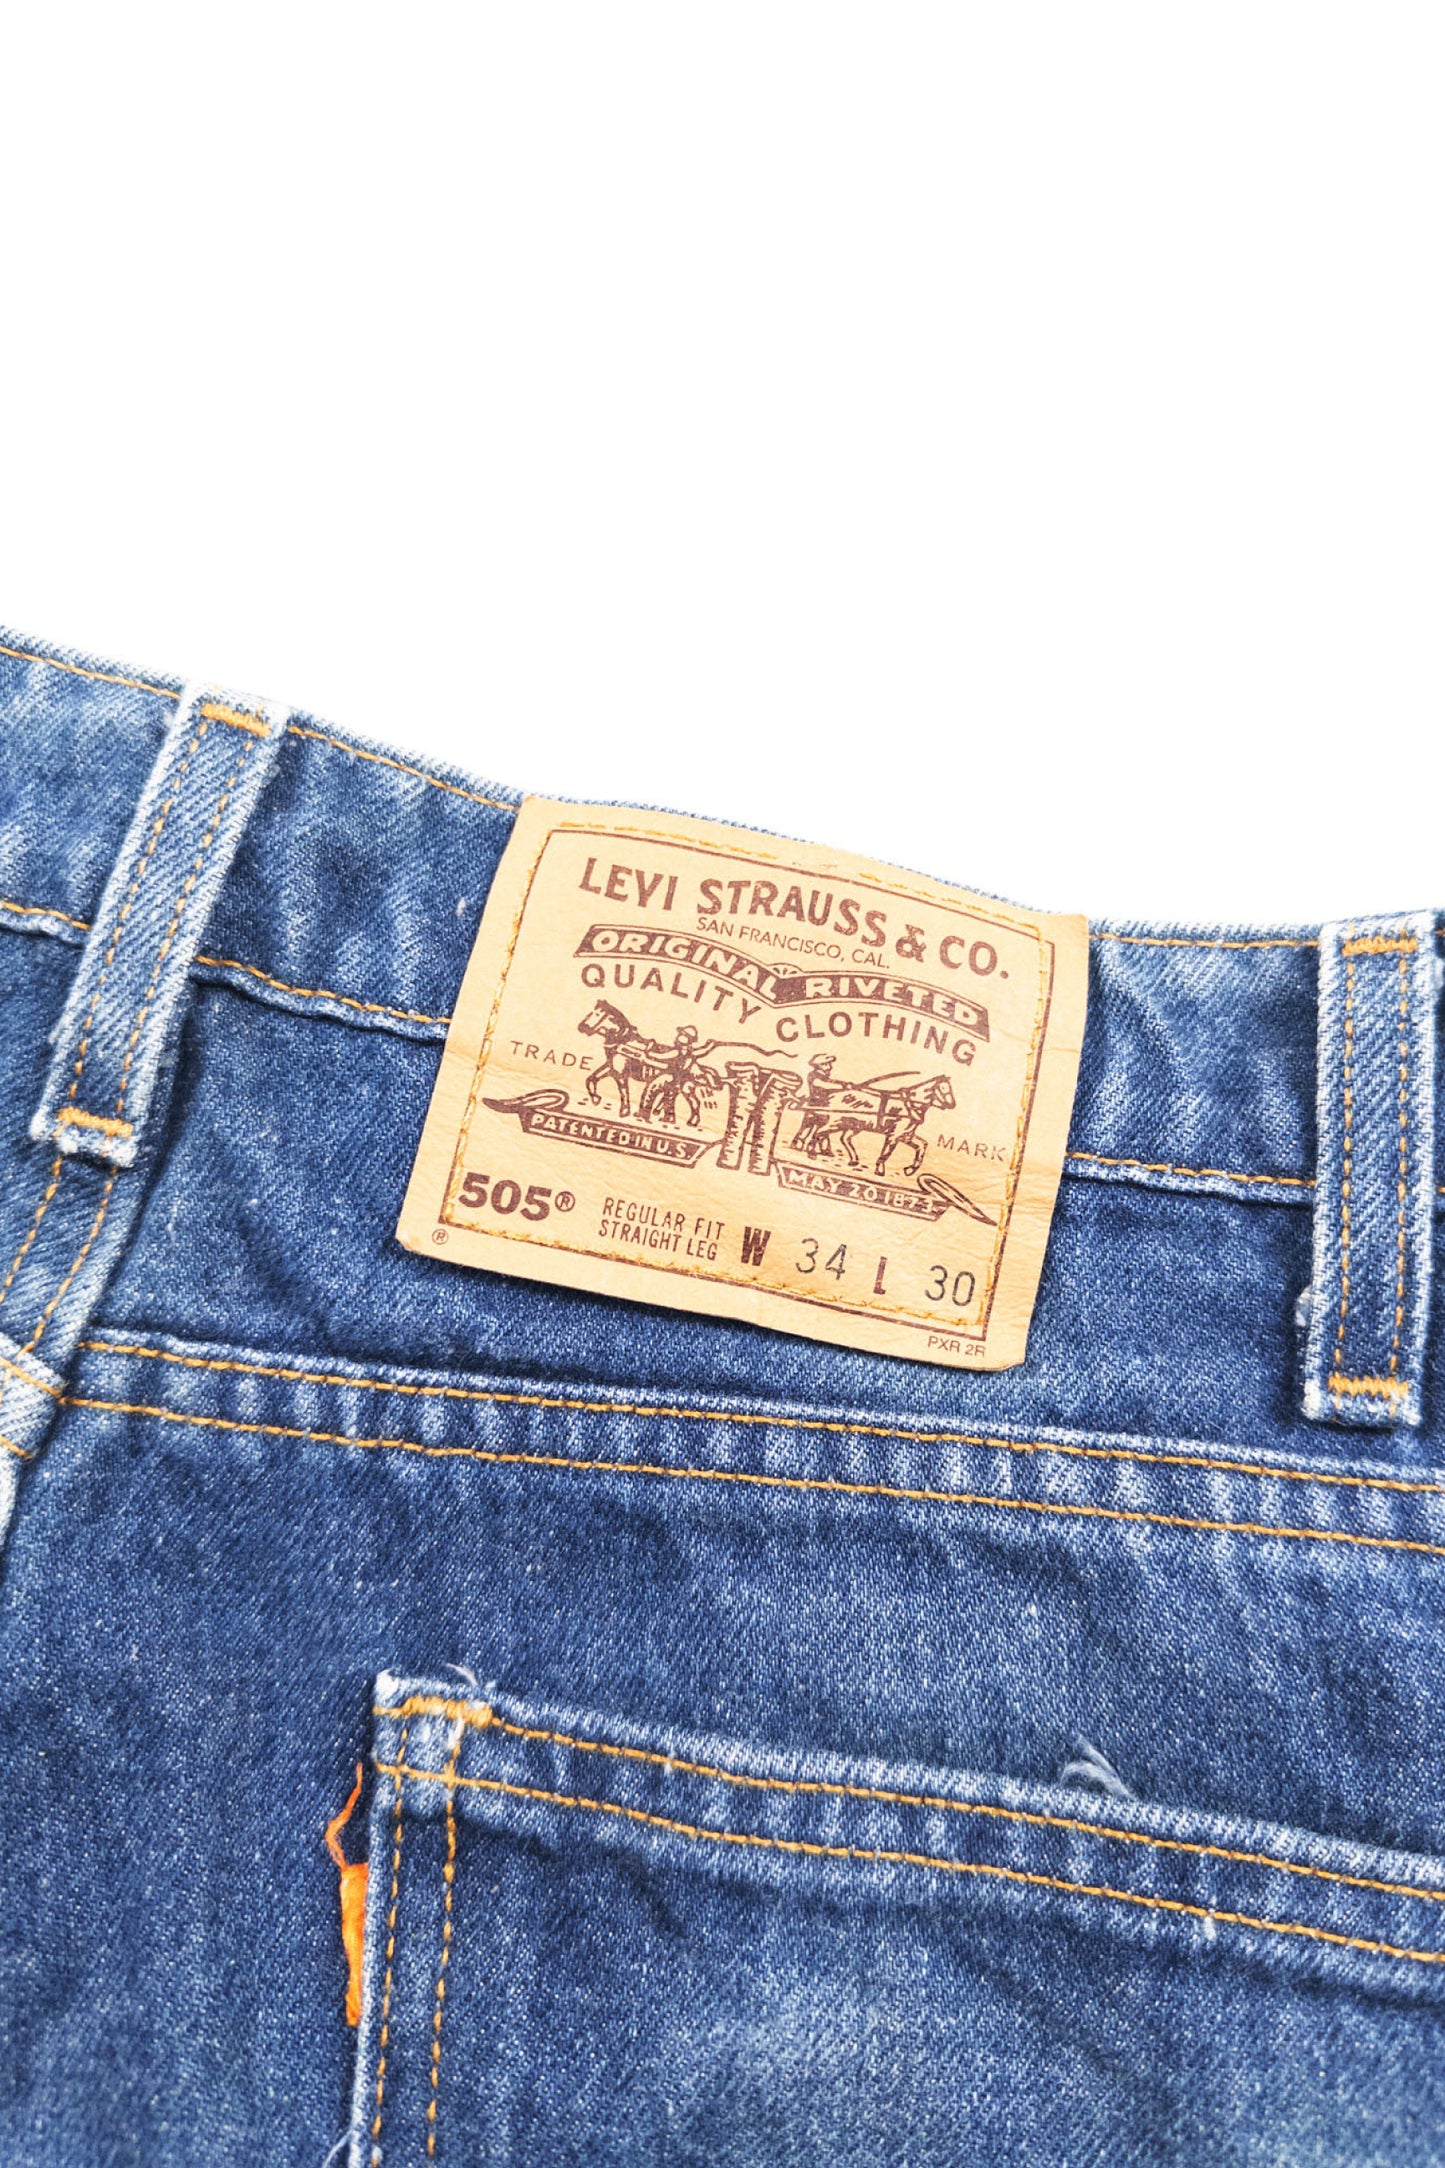 90's Made in USA Levi's 505 denim pants